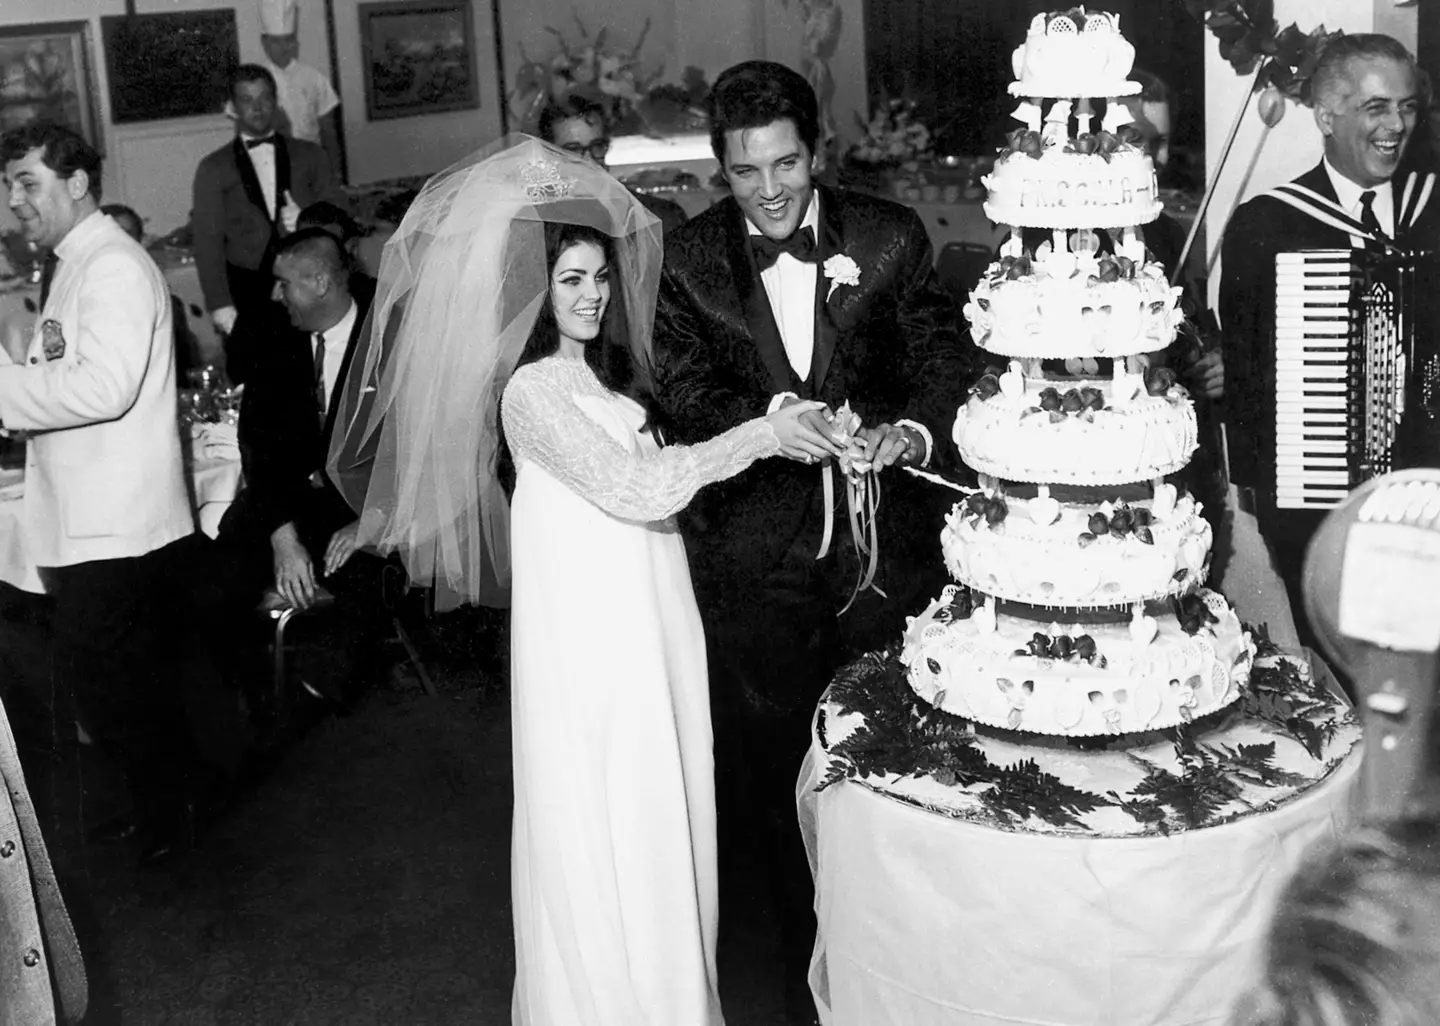 Priscilla was just a teenager when she met Elvis for the first time.